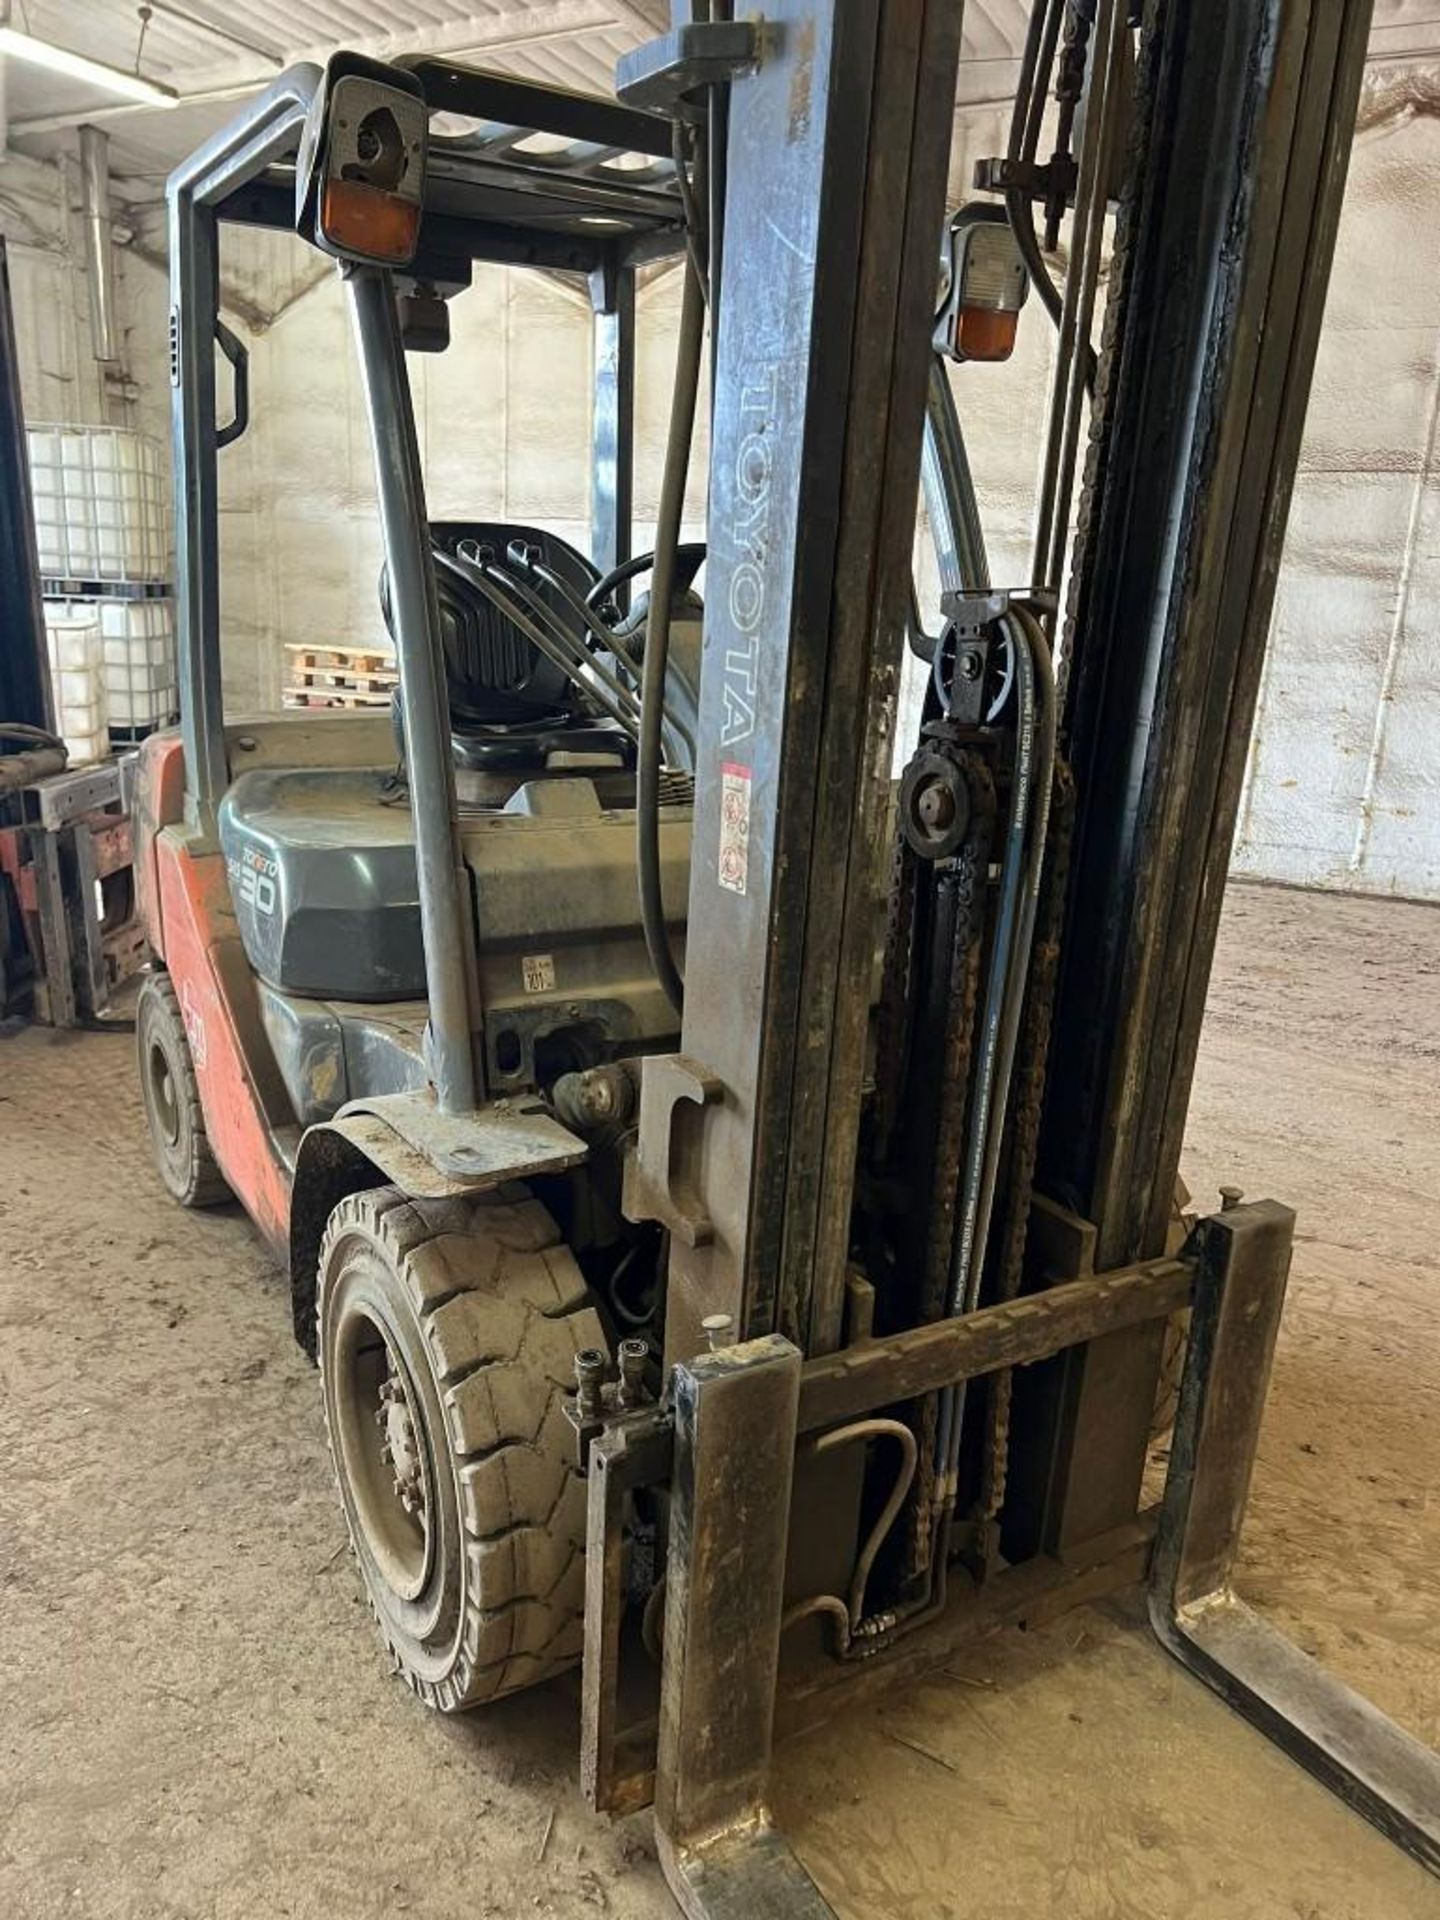 2008 Toyota - 52 - 8FDF30 Forklift - (Lincolnshire) - Image 2 of 5